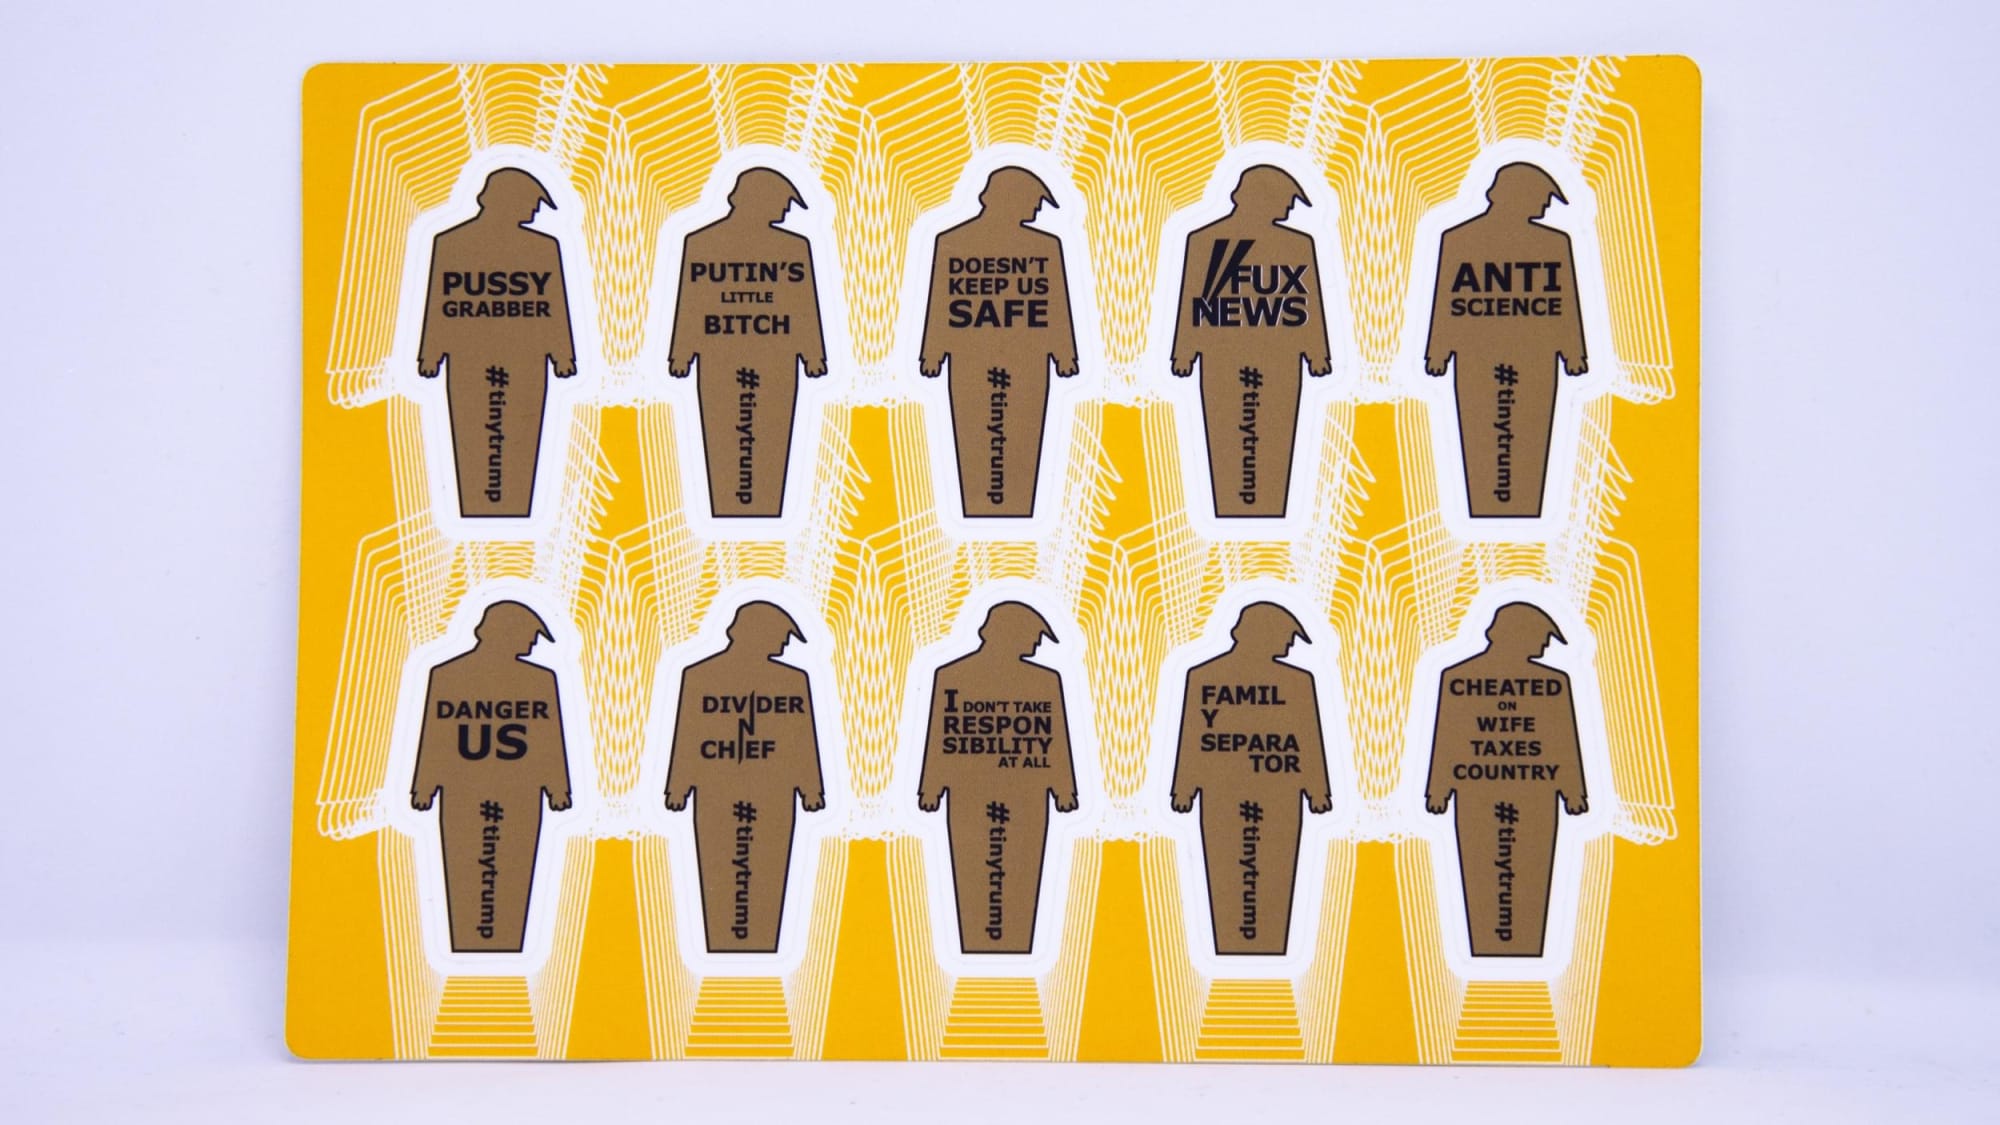 Small thumbnail image of Product photograph of a 4 inch by 6 inch sticker sheet consisting of a yellow background and 12 individual tiny trumps with the following slogans: Property of Russia, American Virus, Con & Troll, Dictator, Sexist, Low Ratings, Sad, Lies Lies Lies, Unfit, Black hole graphic